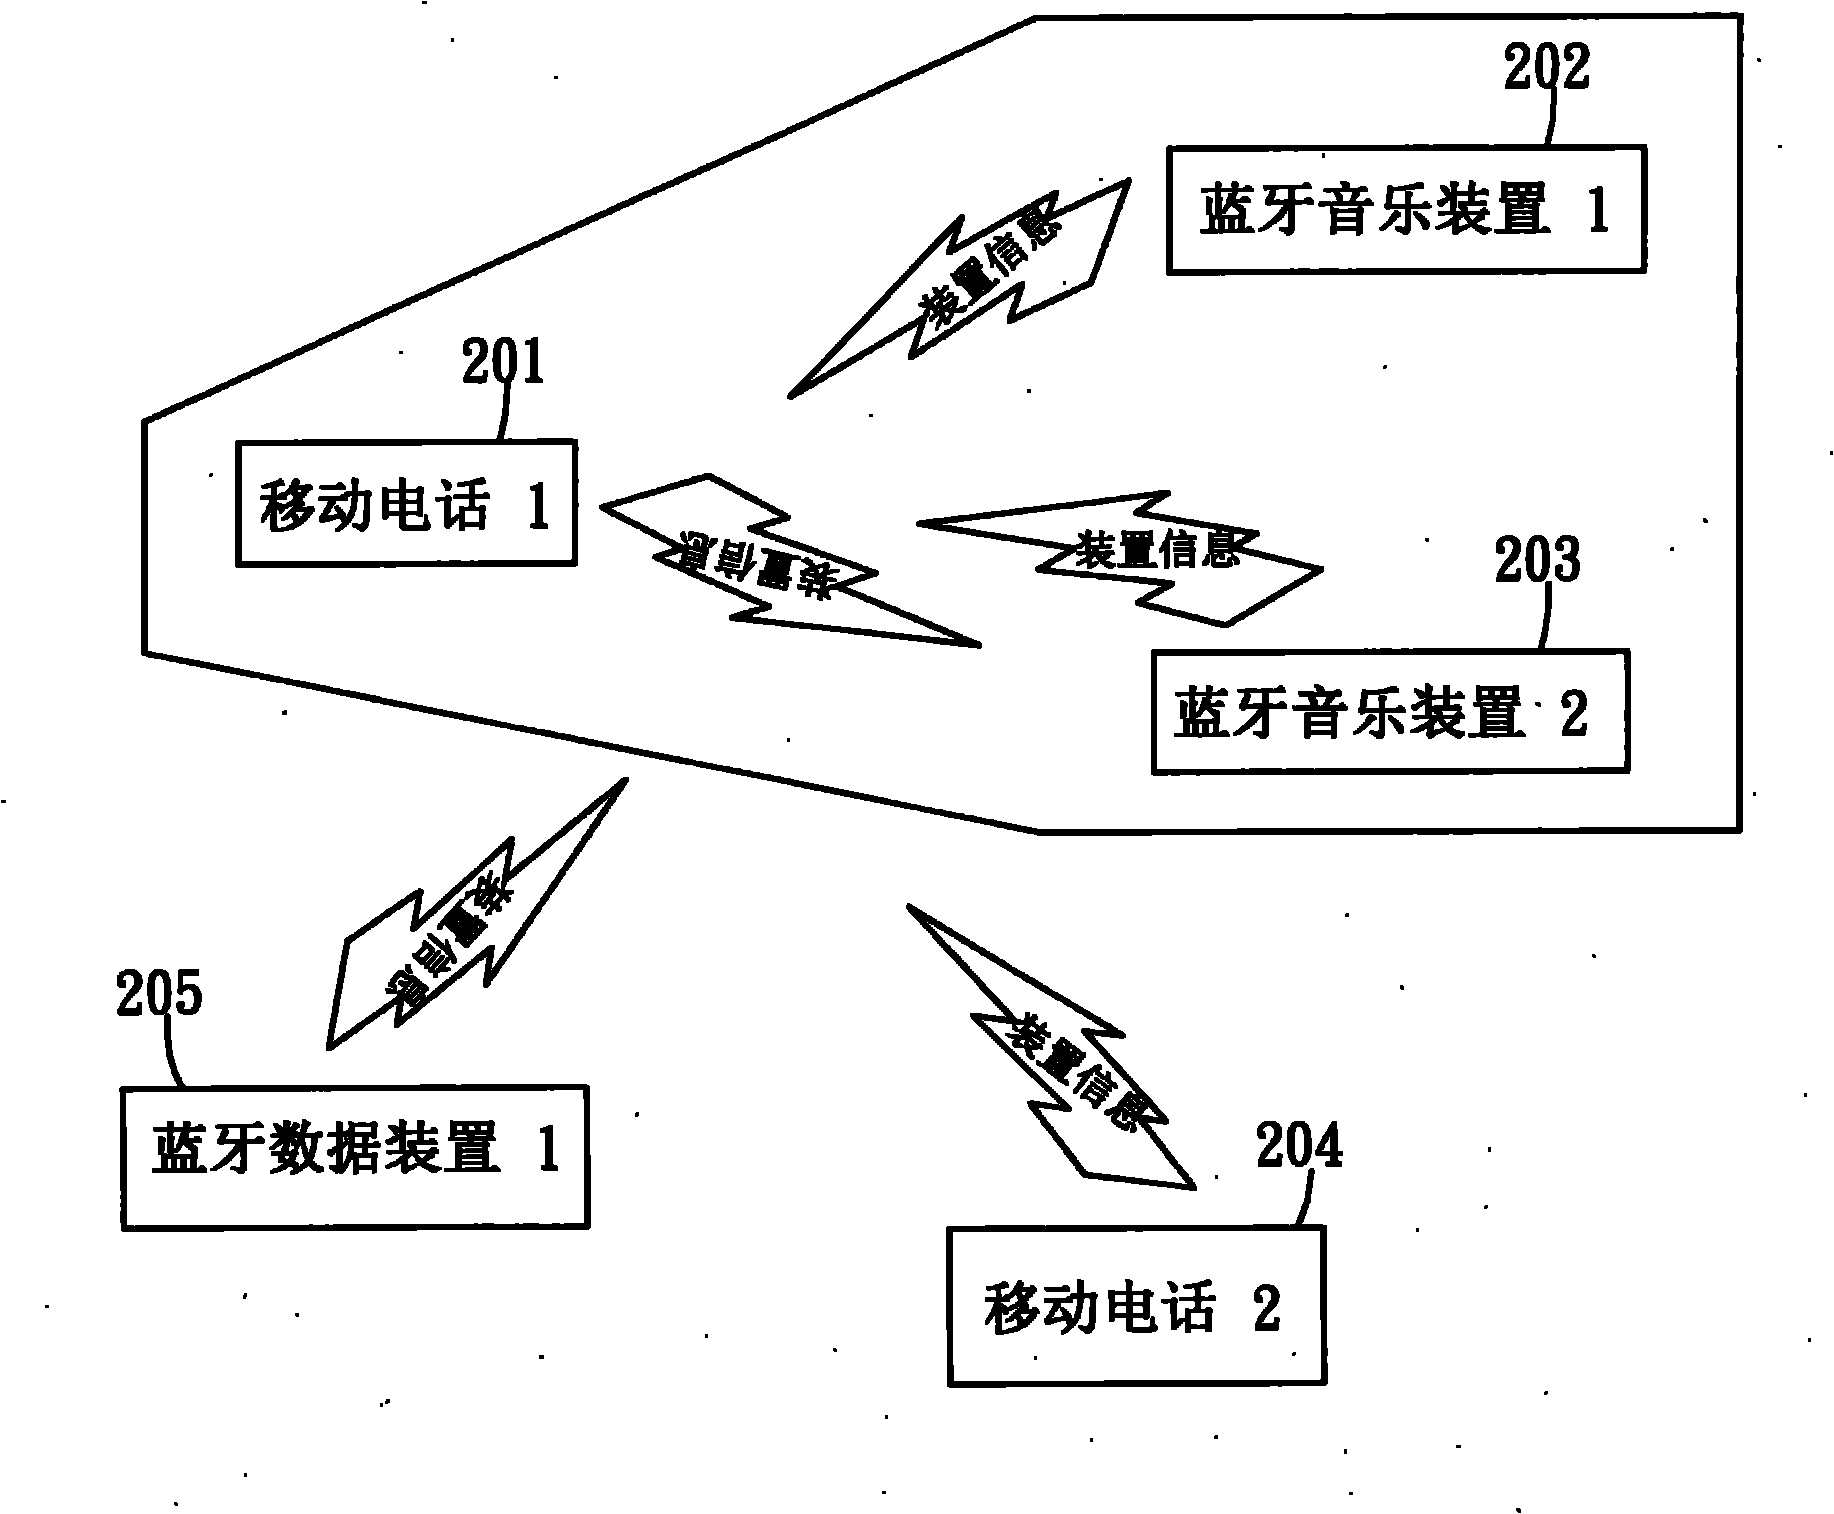 Method for automatic pairing to a wireless network